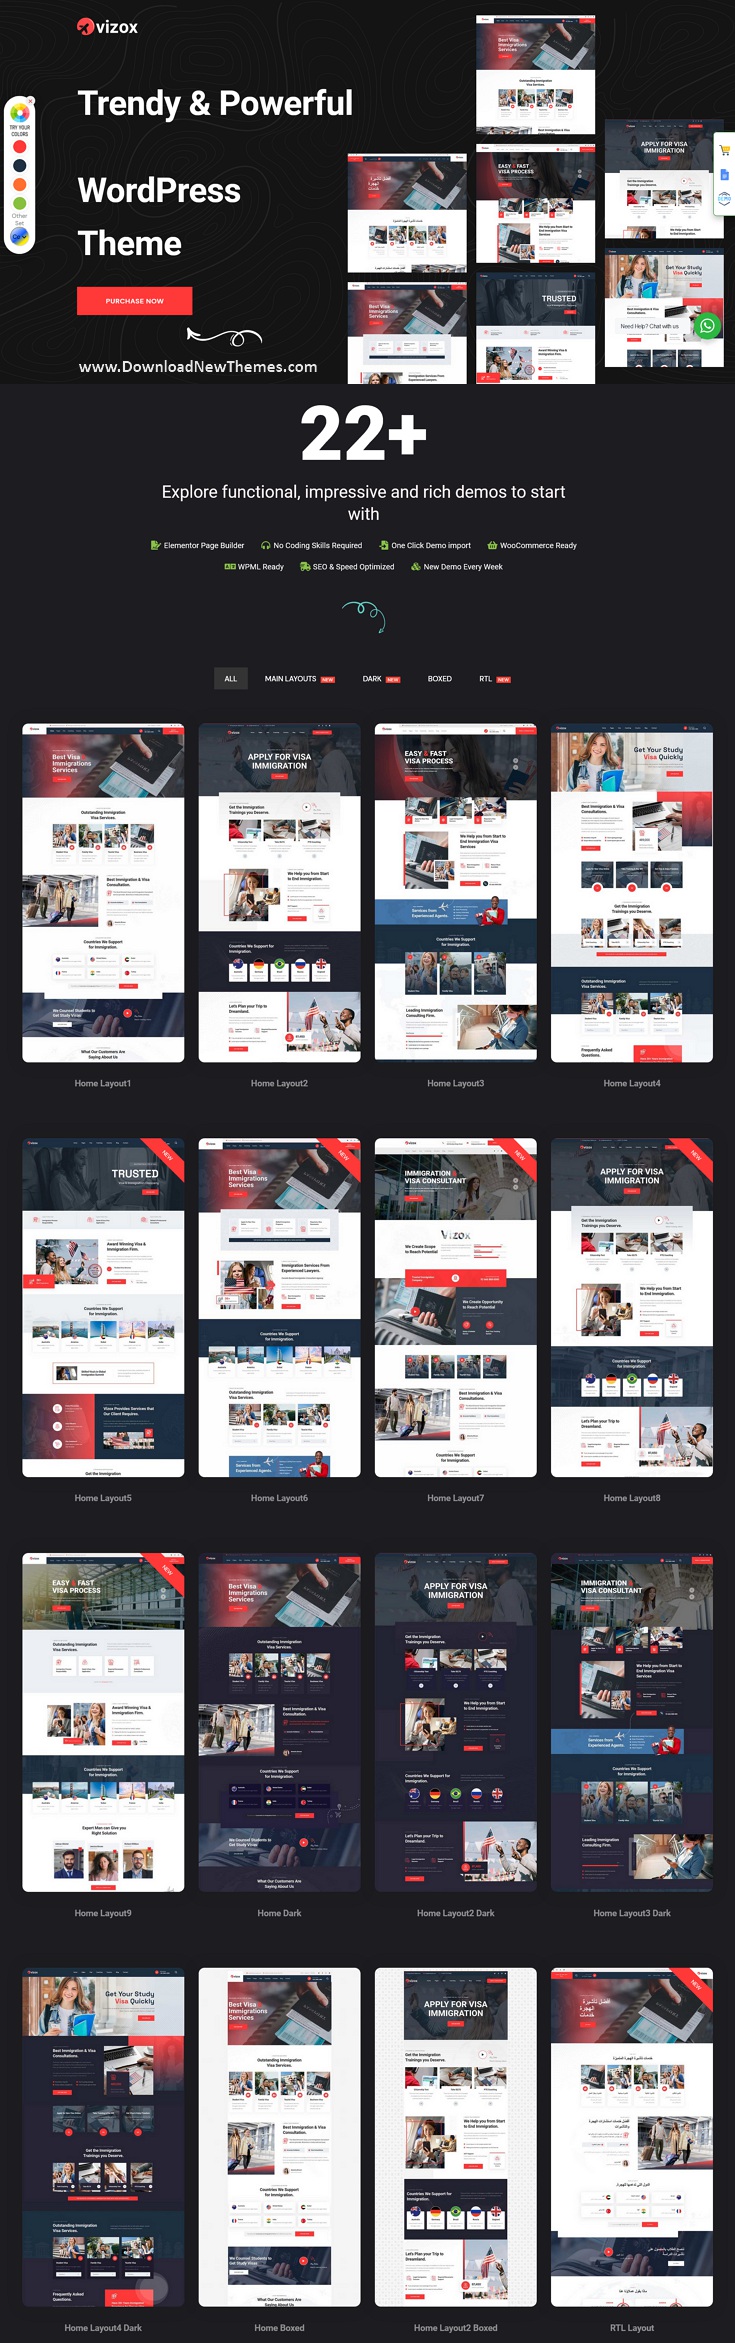 Vizox - Immigration Visa Consulting WordPress Theme Review